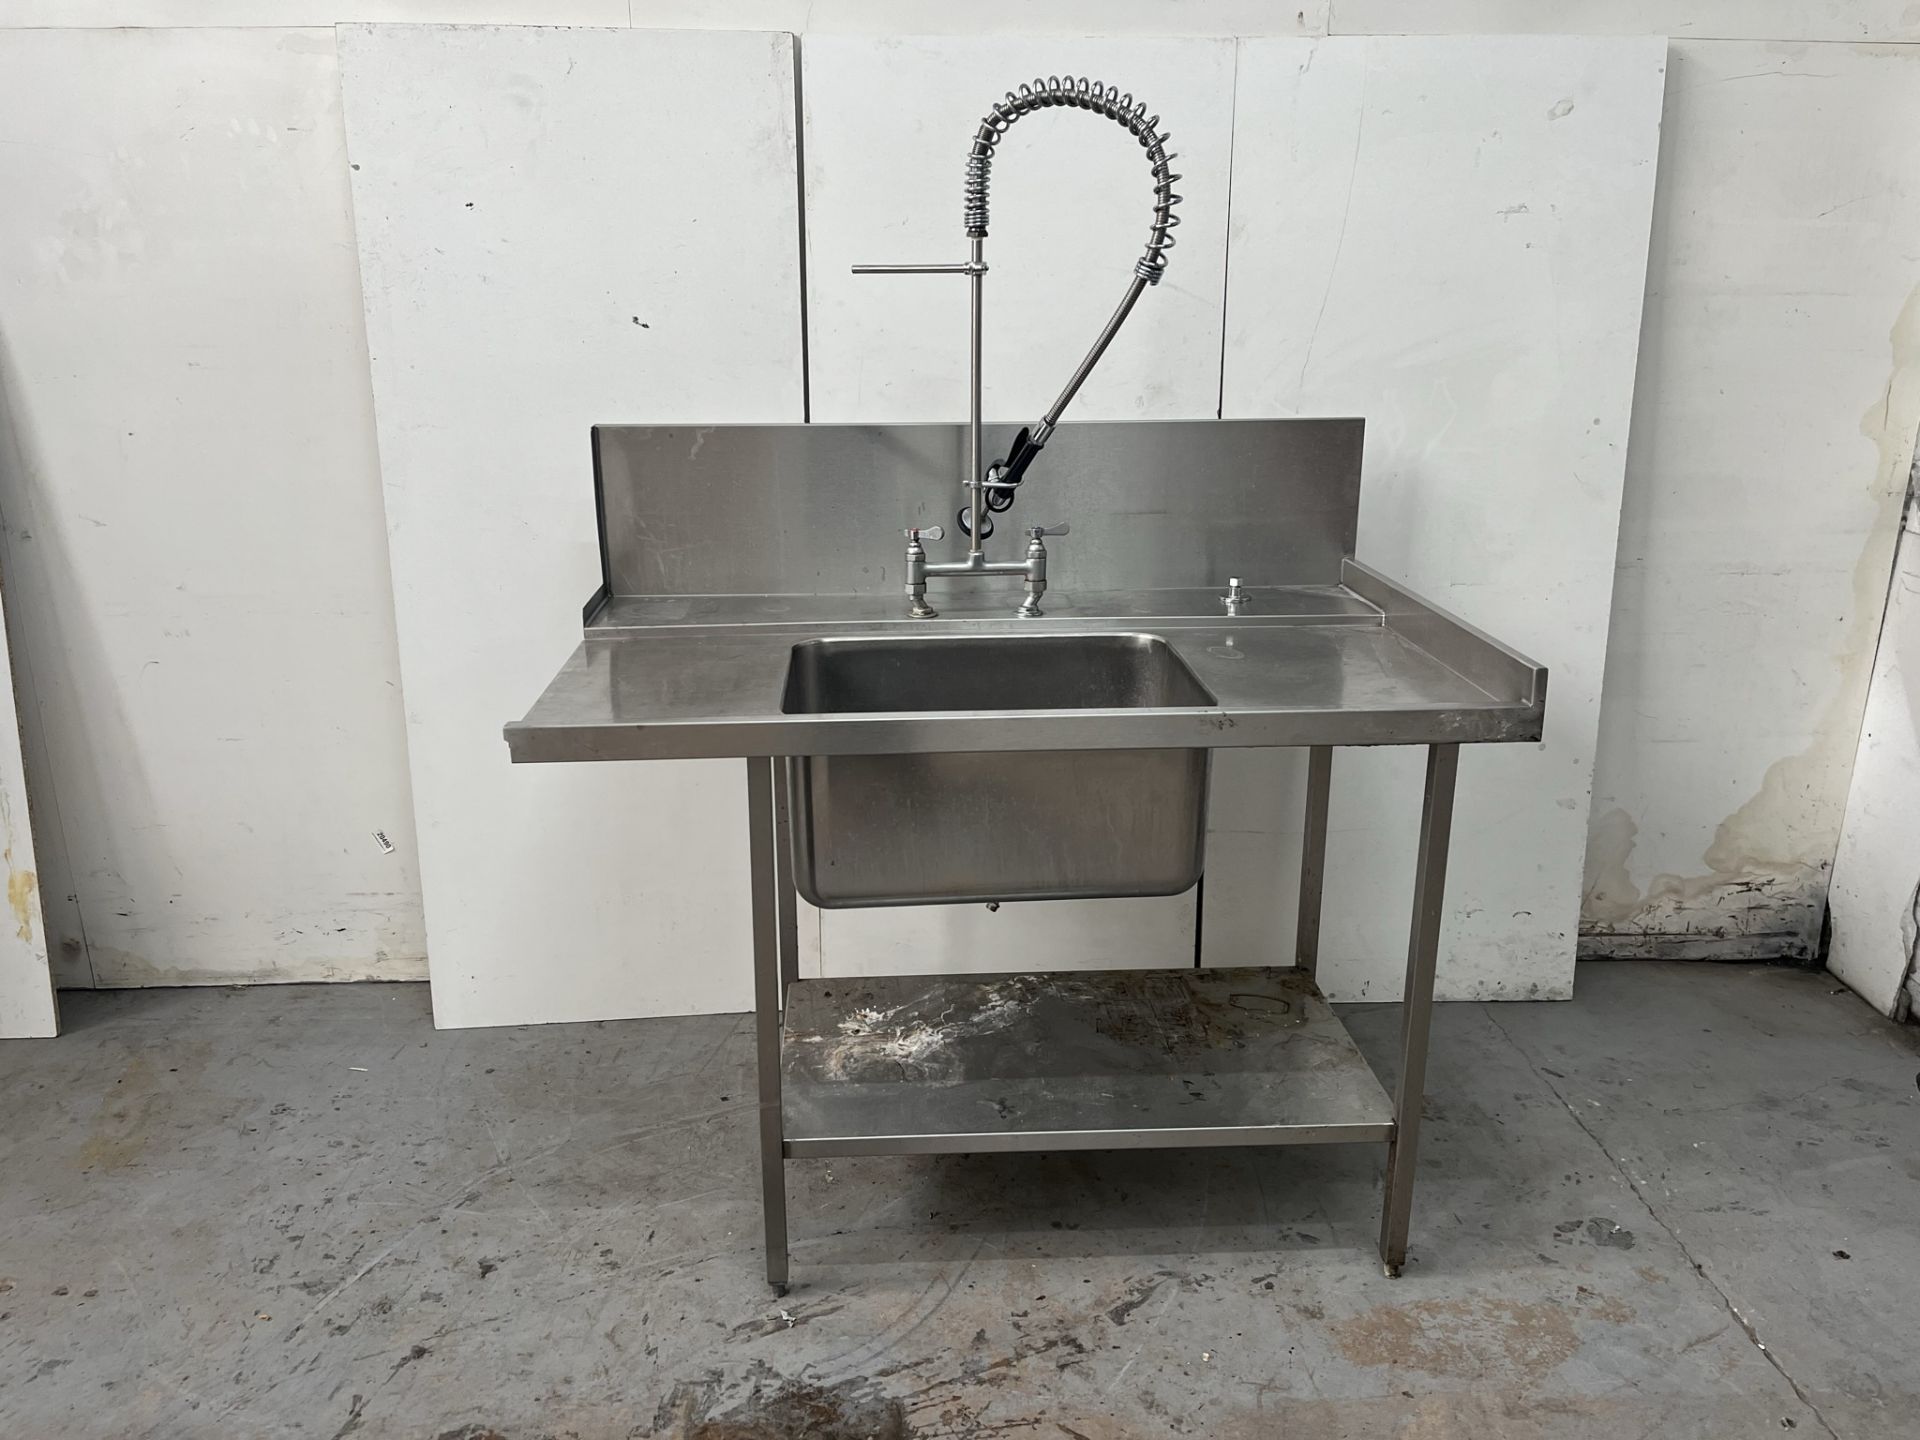 Commercial Stainless Steel Catering Table With Pre Rinse Tap & Sink - Image 2 of 24